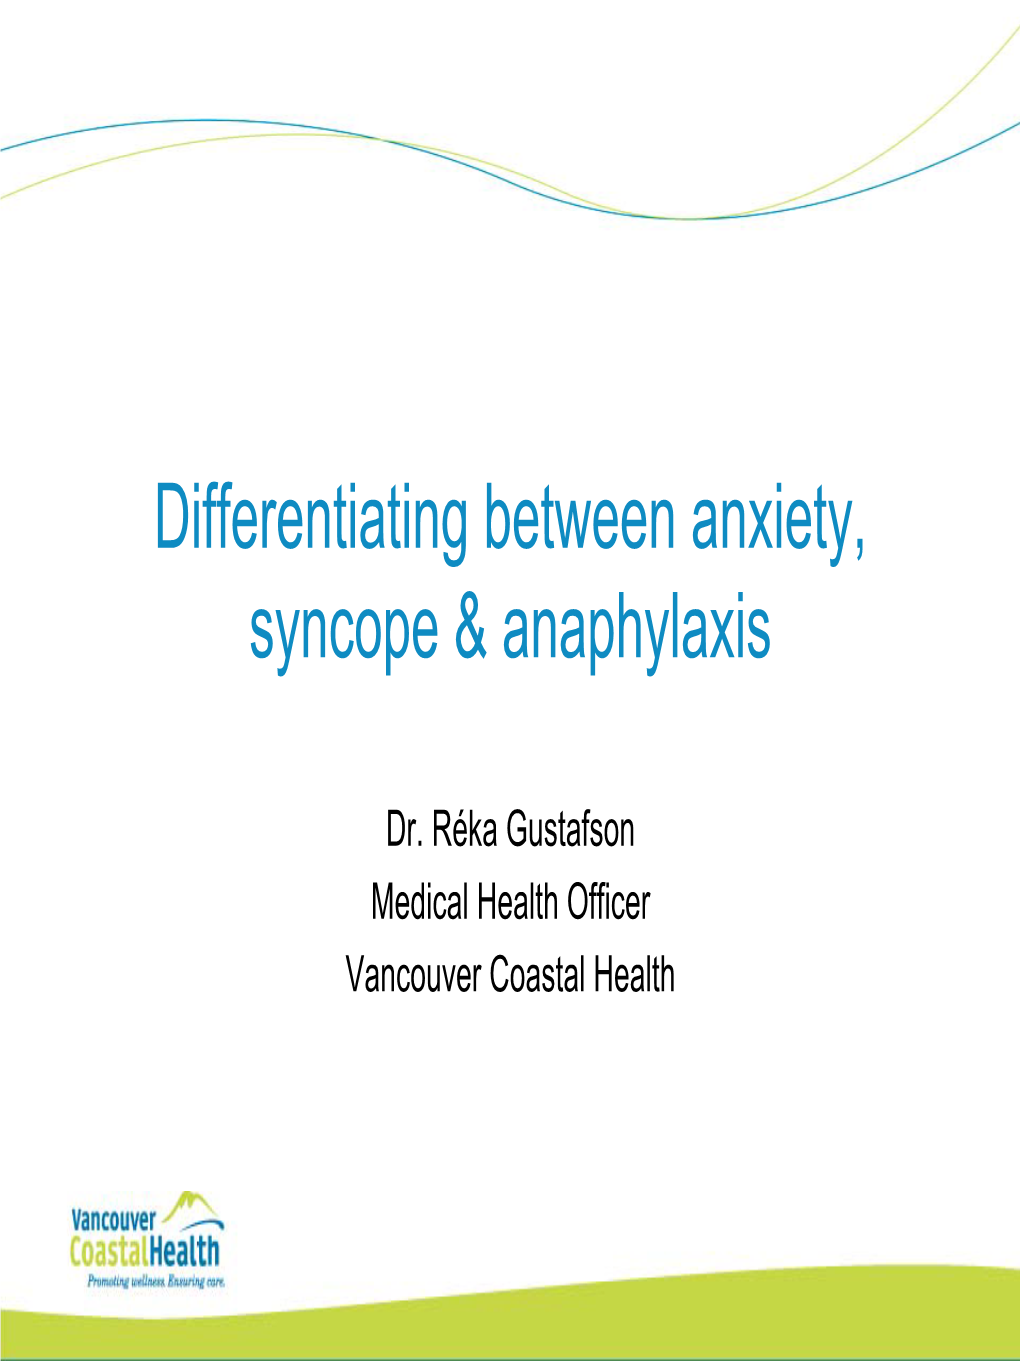 Differentiating Between Anxiety, Syncope & Anaphylaxis